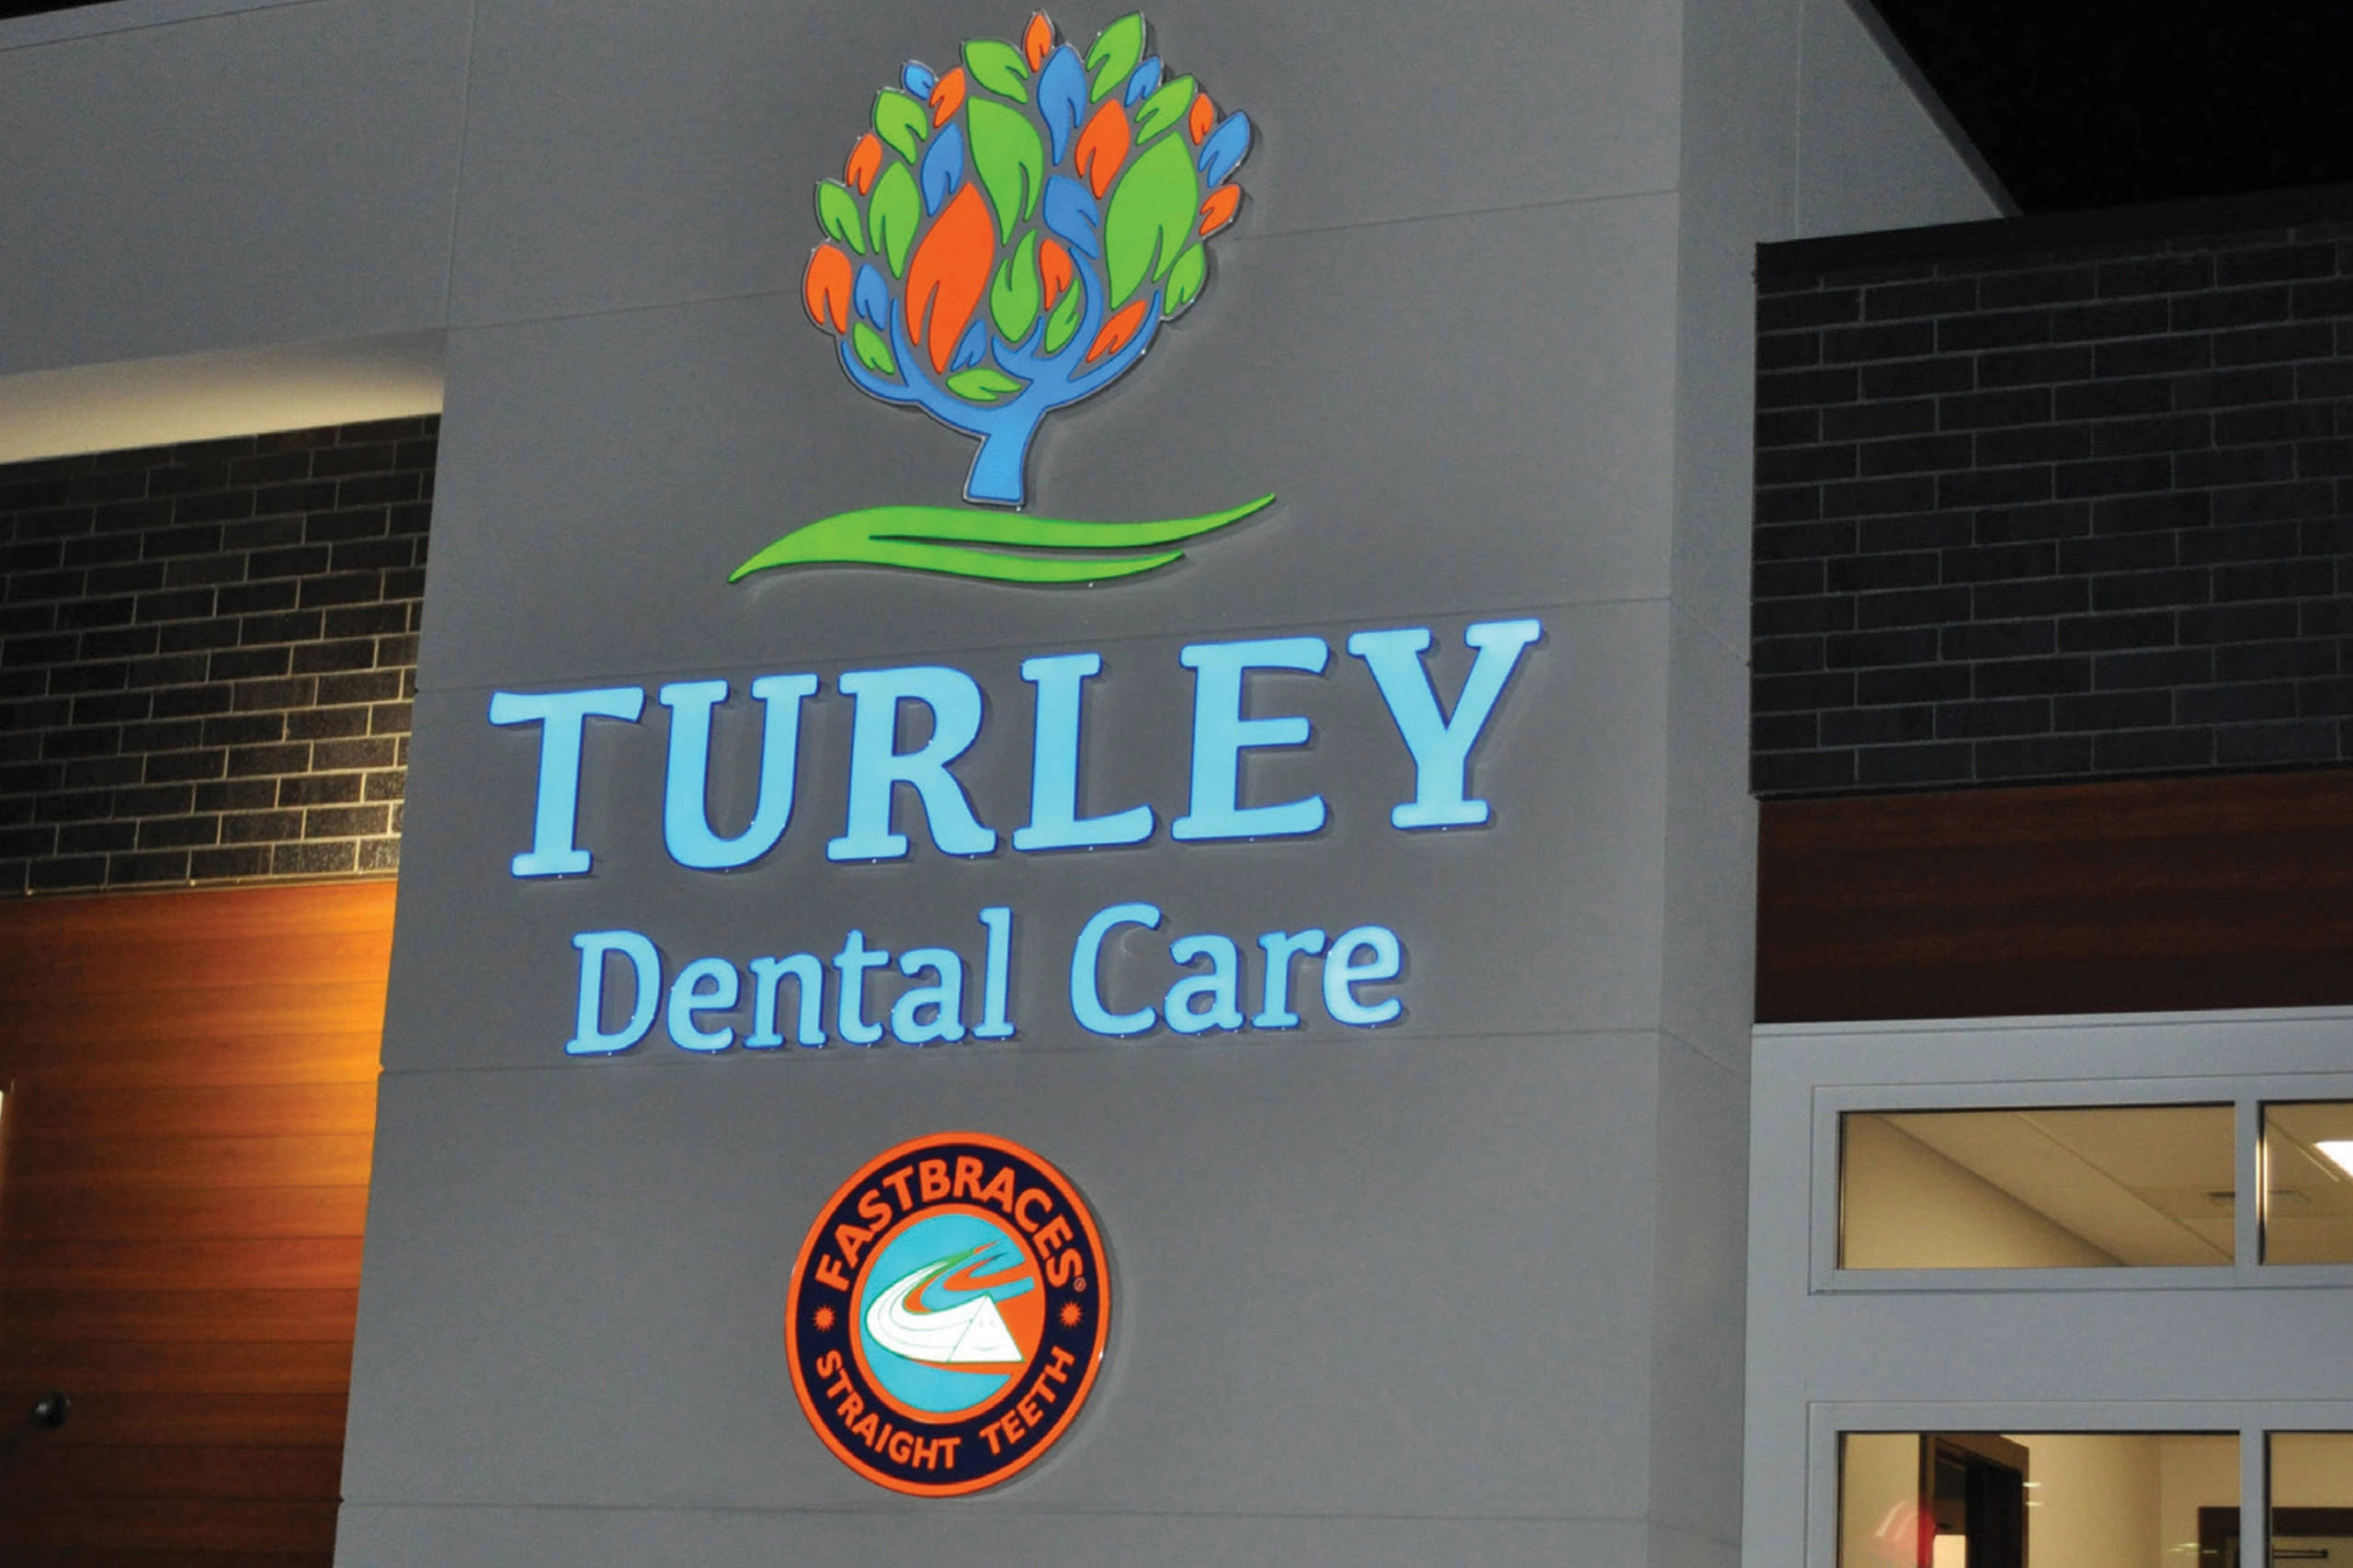 Turley Dental Care Sign